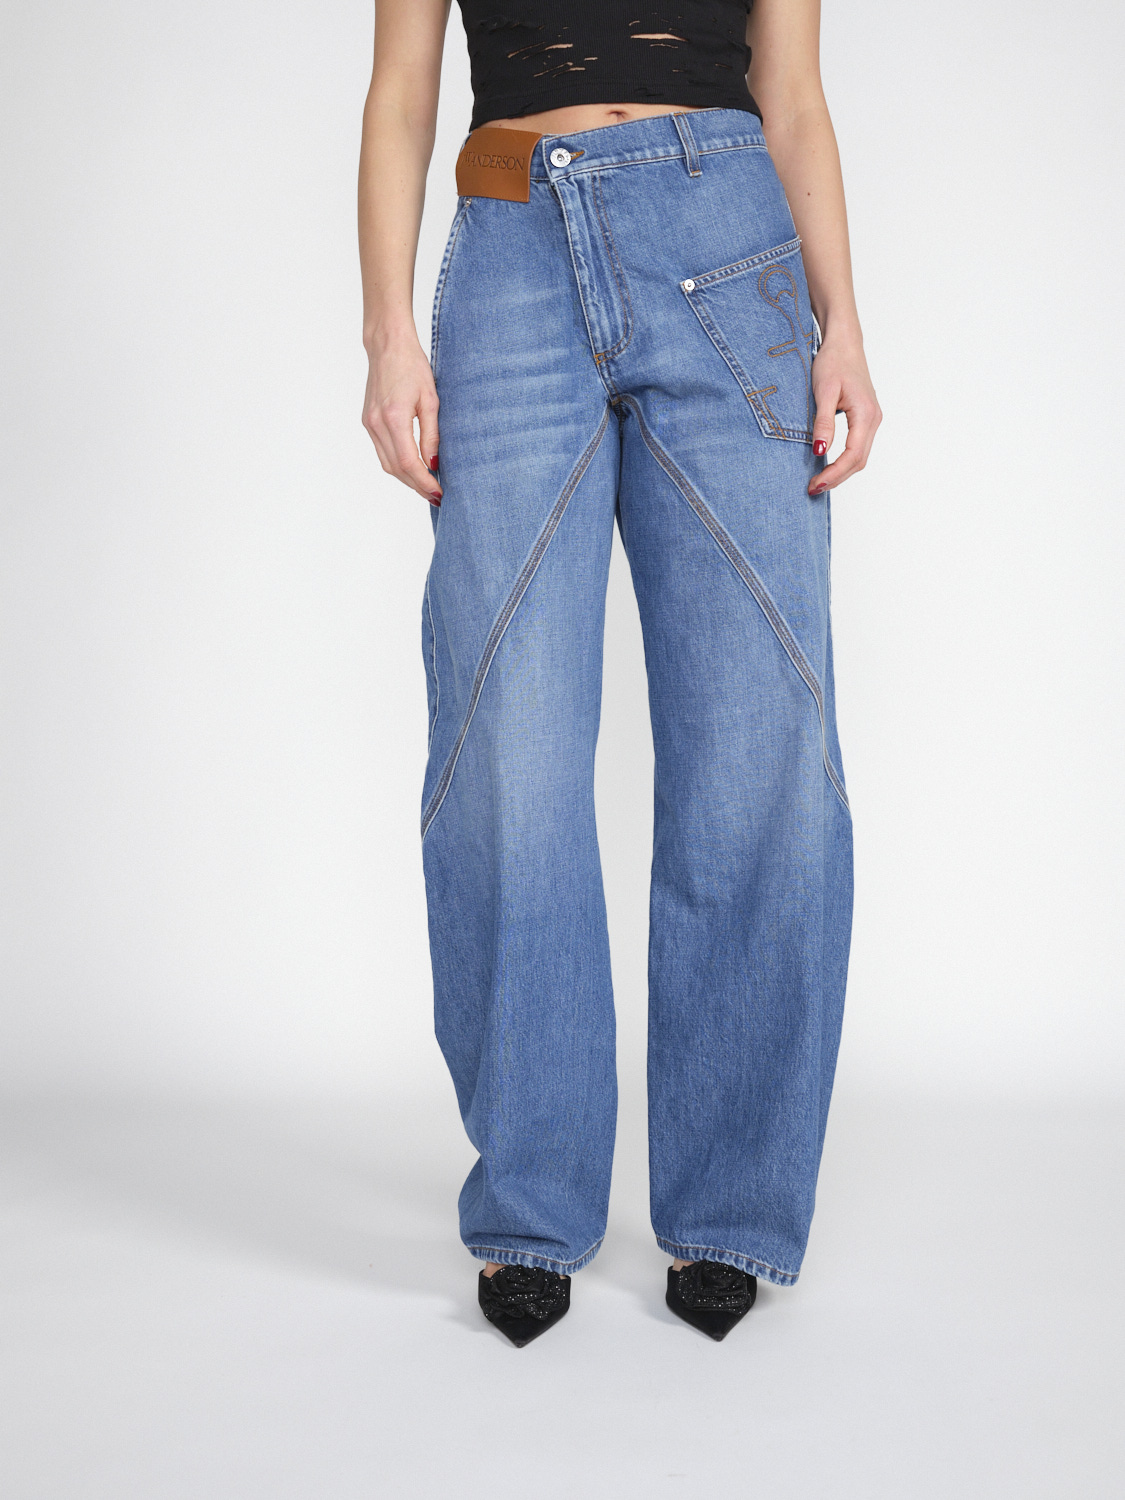 JW Anderson Worker-style blue jeans in rugged cotton  blue 26